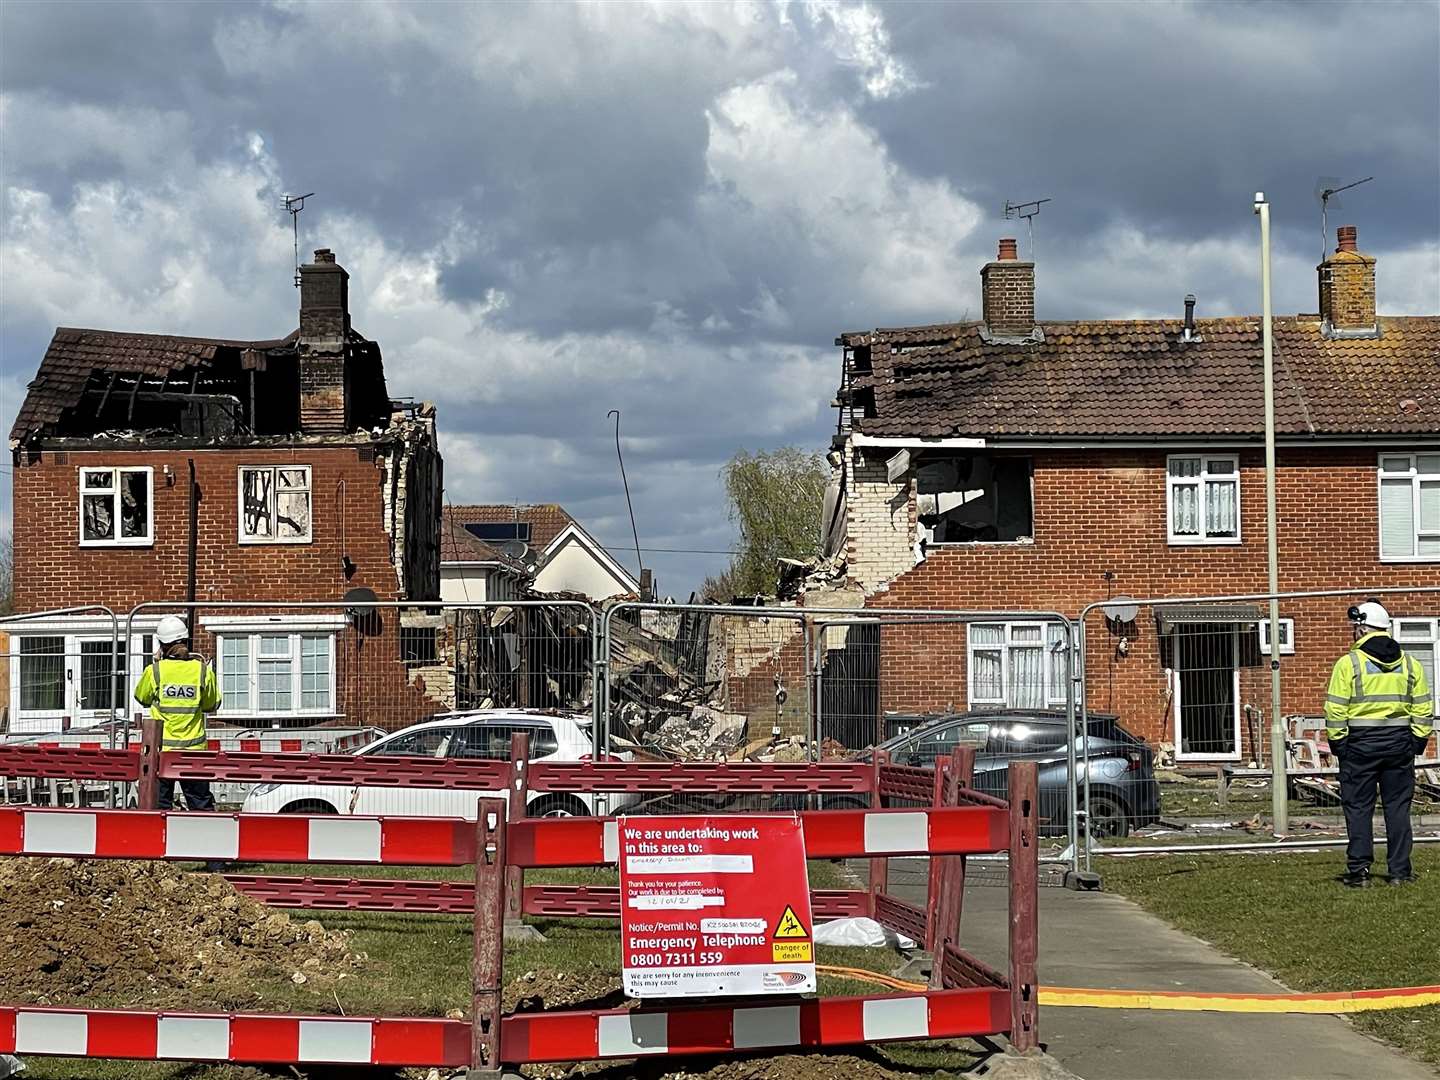 The explosion destroyed one house and severely damaged two others